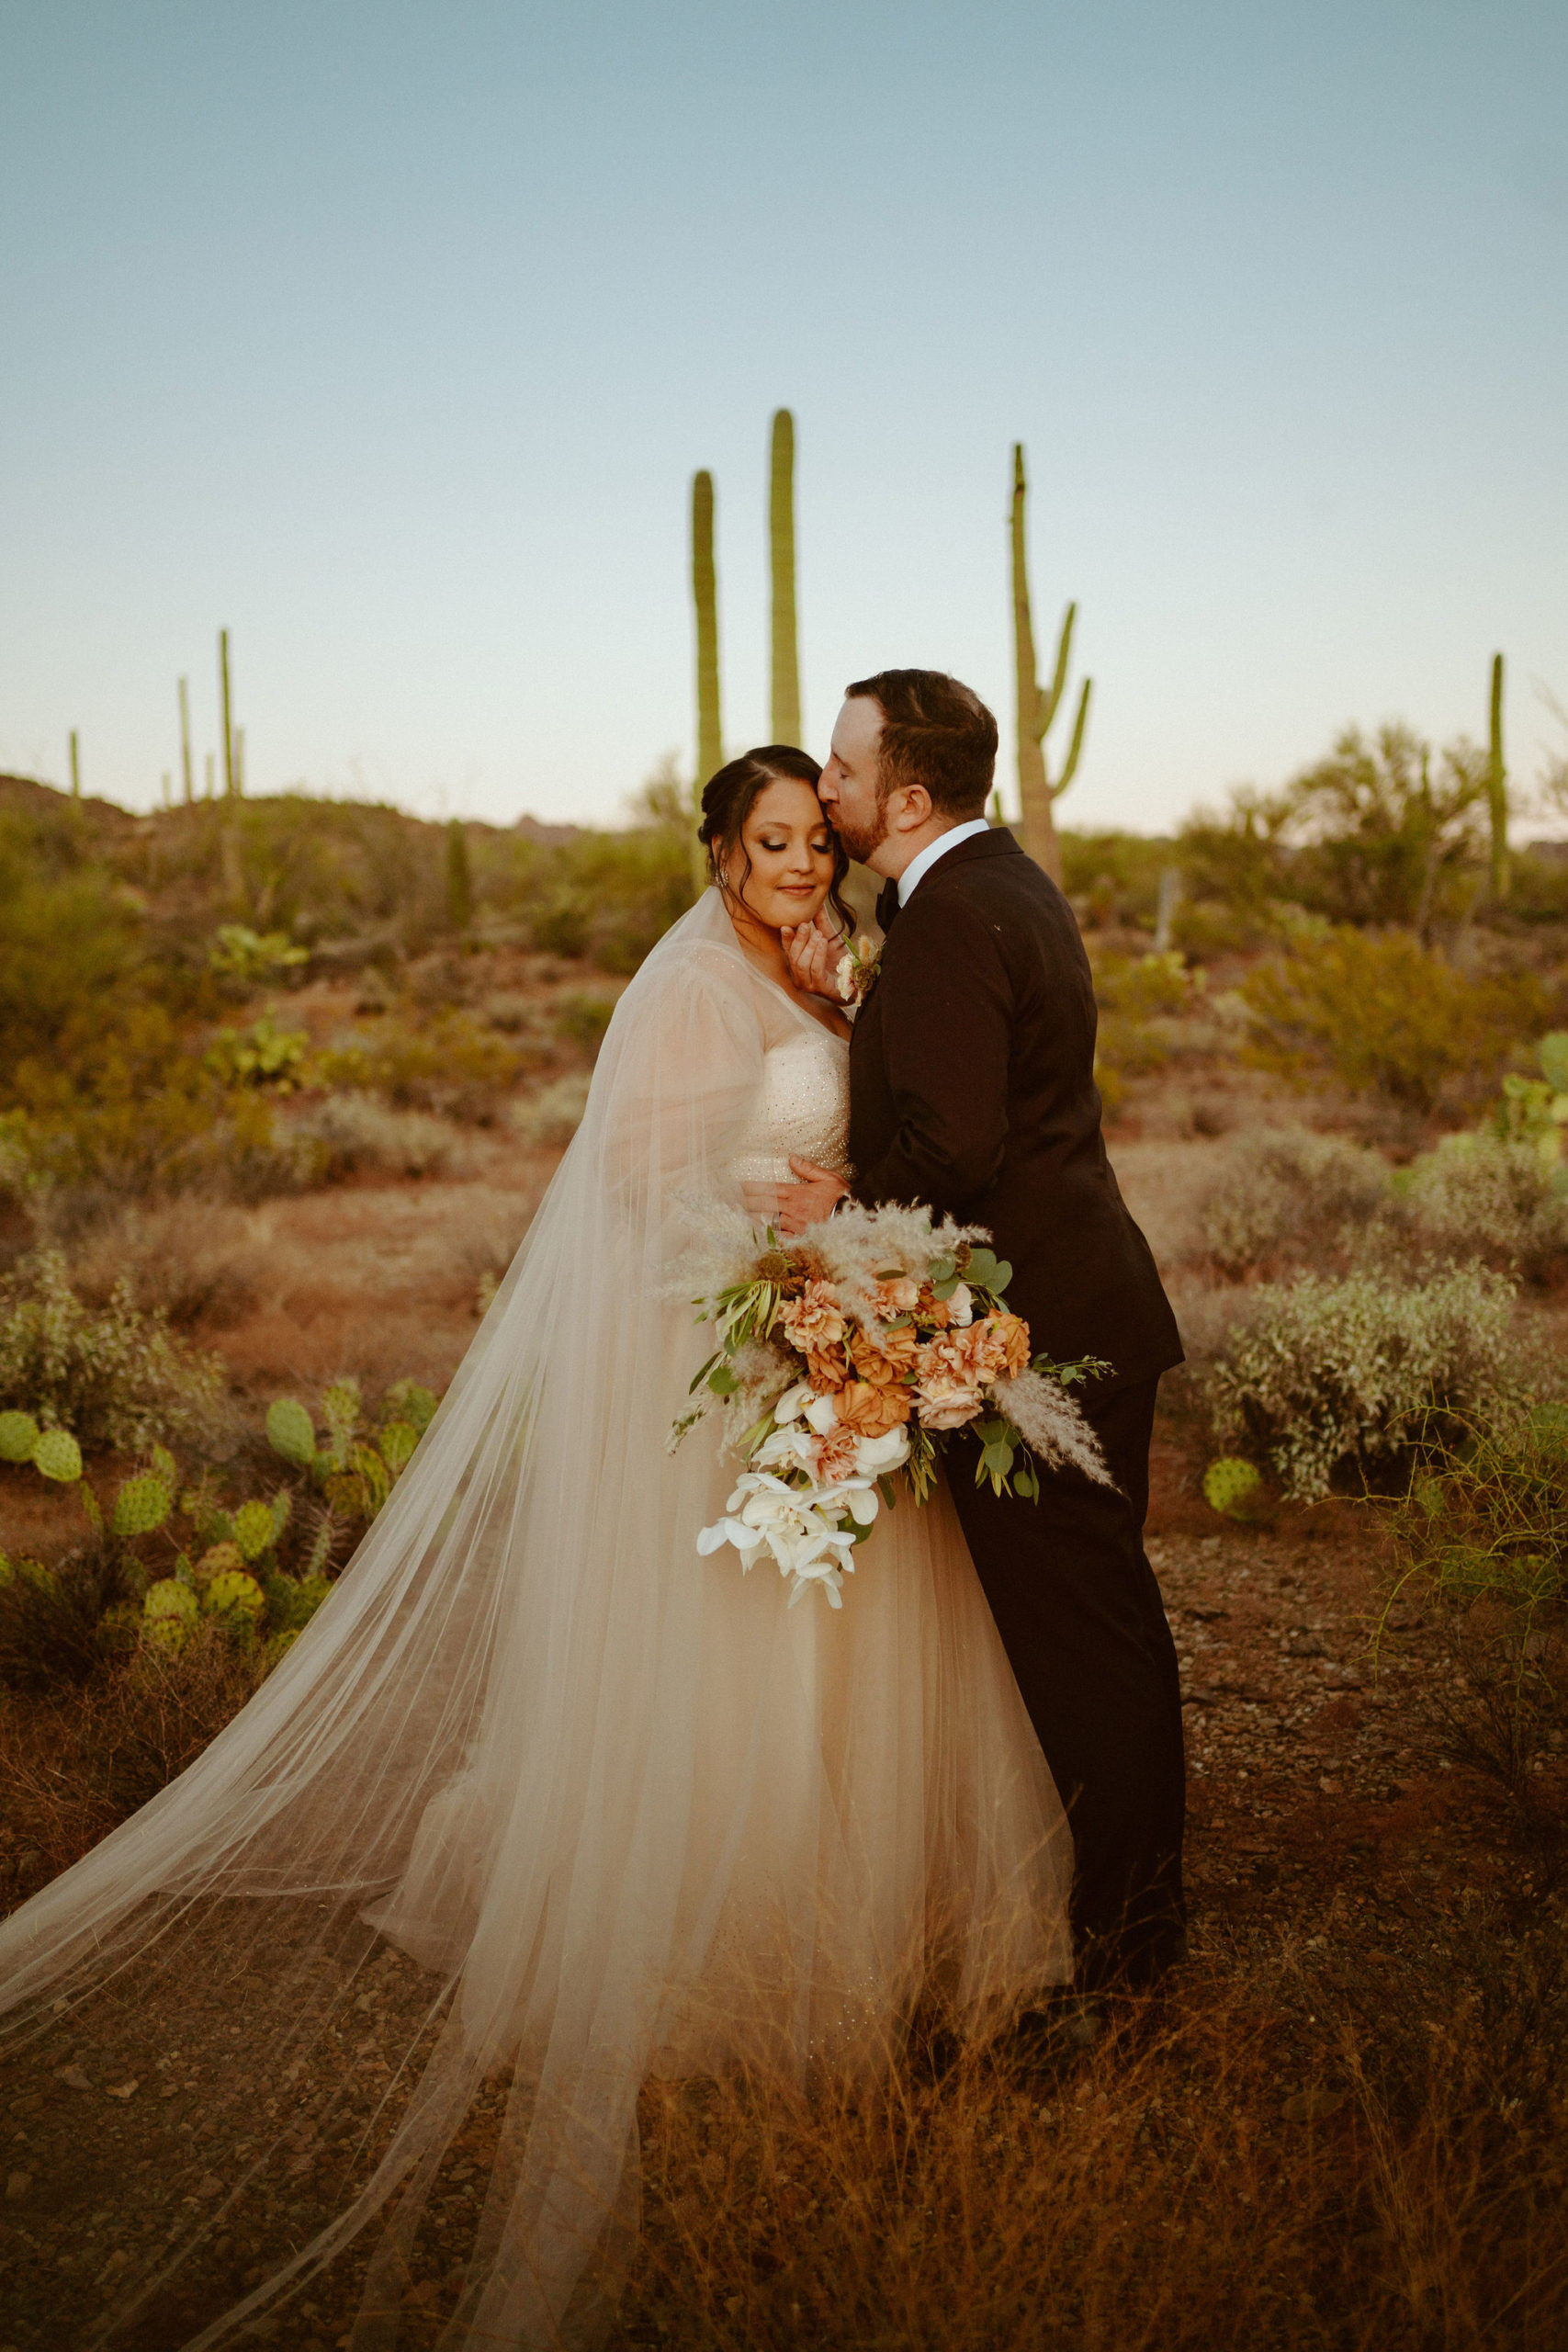 Saguaro National Park Micro-Wedding. The groom kissing the brides forehead as she leans in